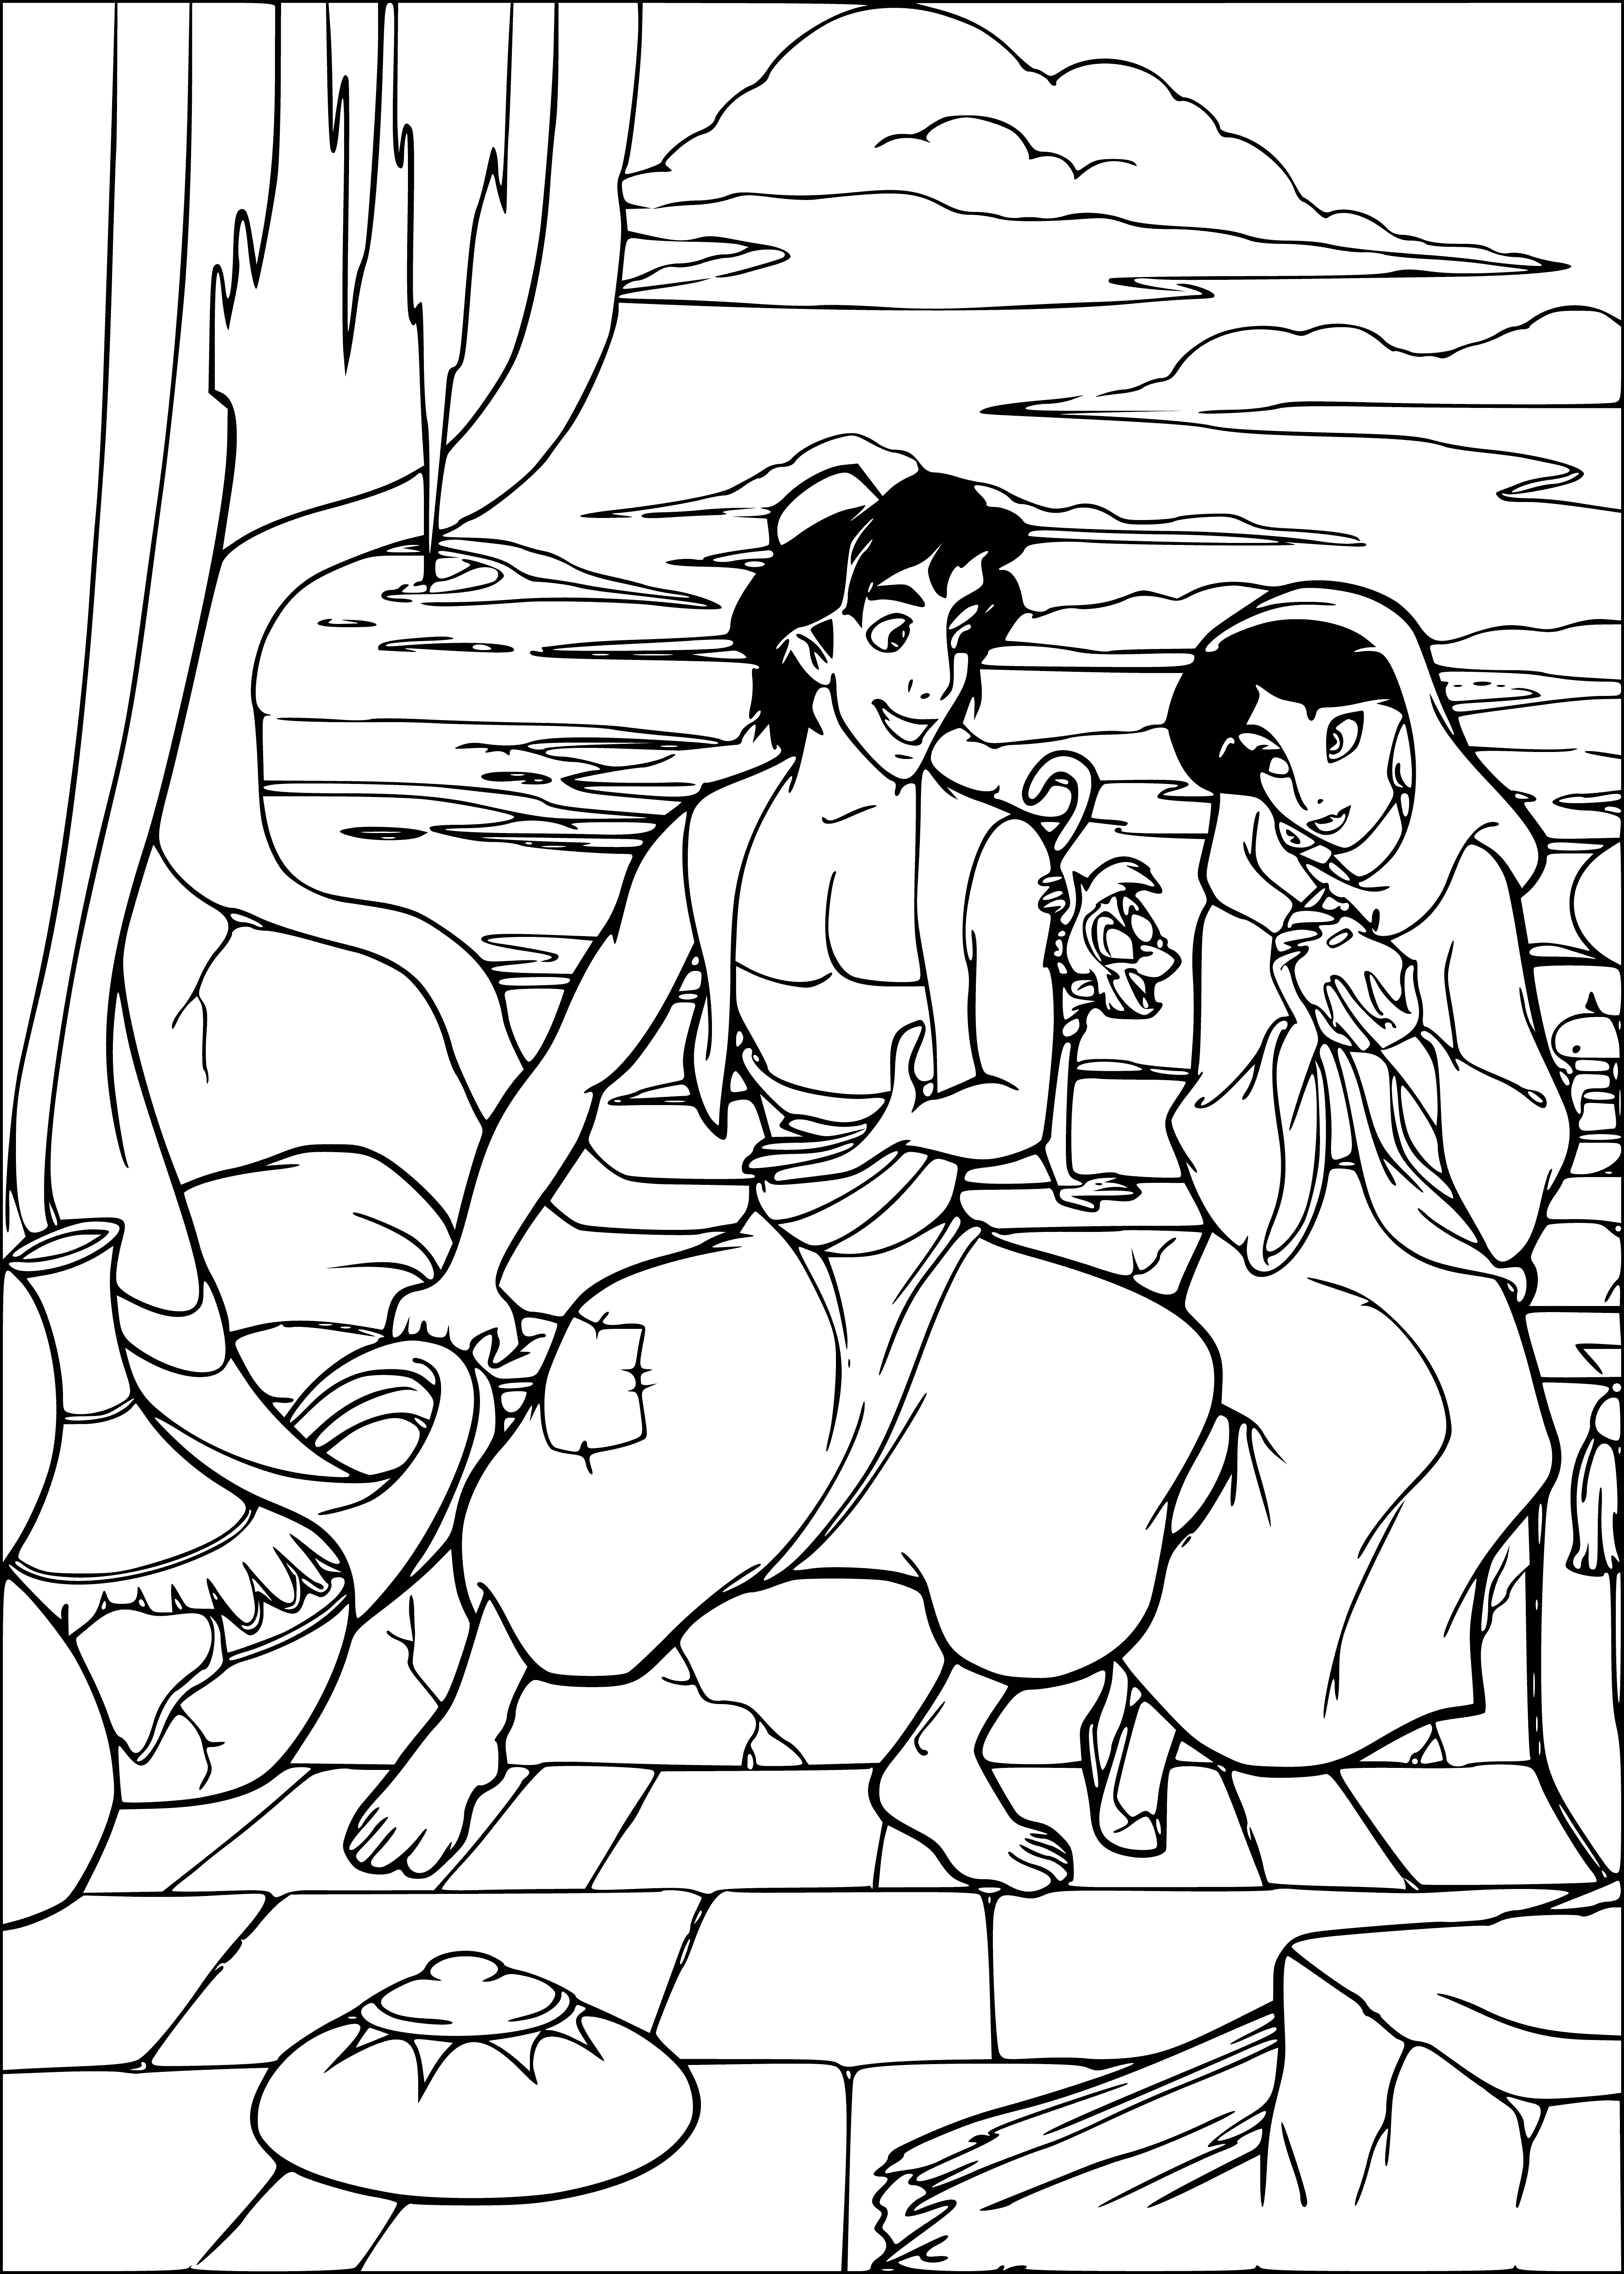 coloring page: Aladdin & Jasmine take a romantic ride on a flying carpet, leaning in to share a kiss.